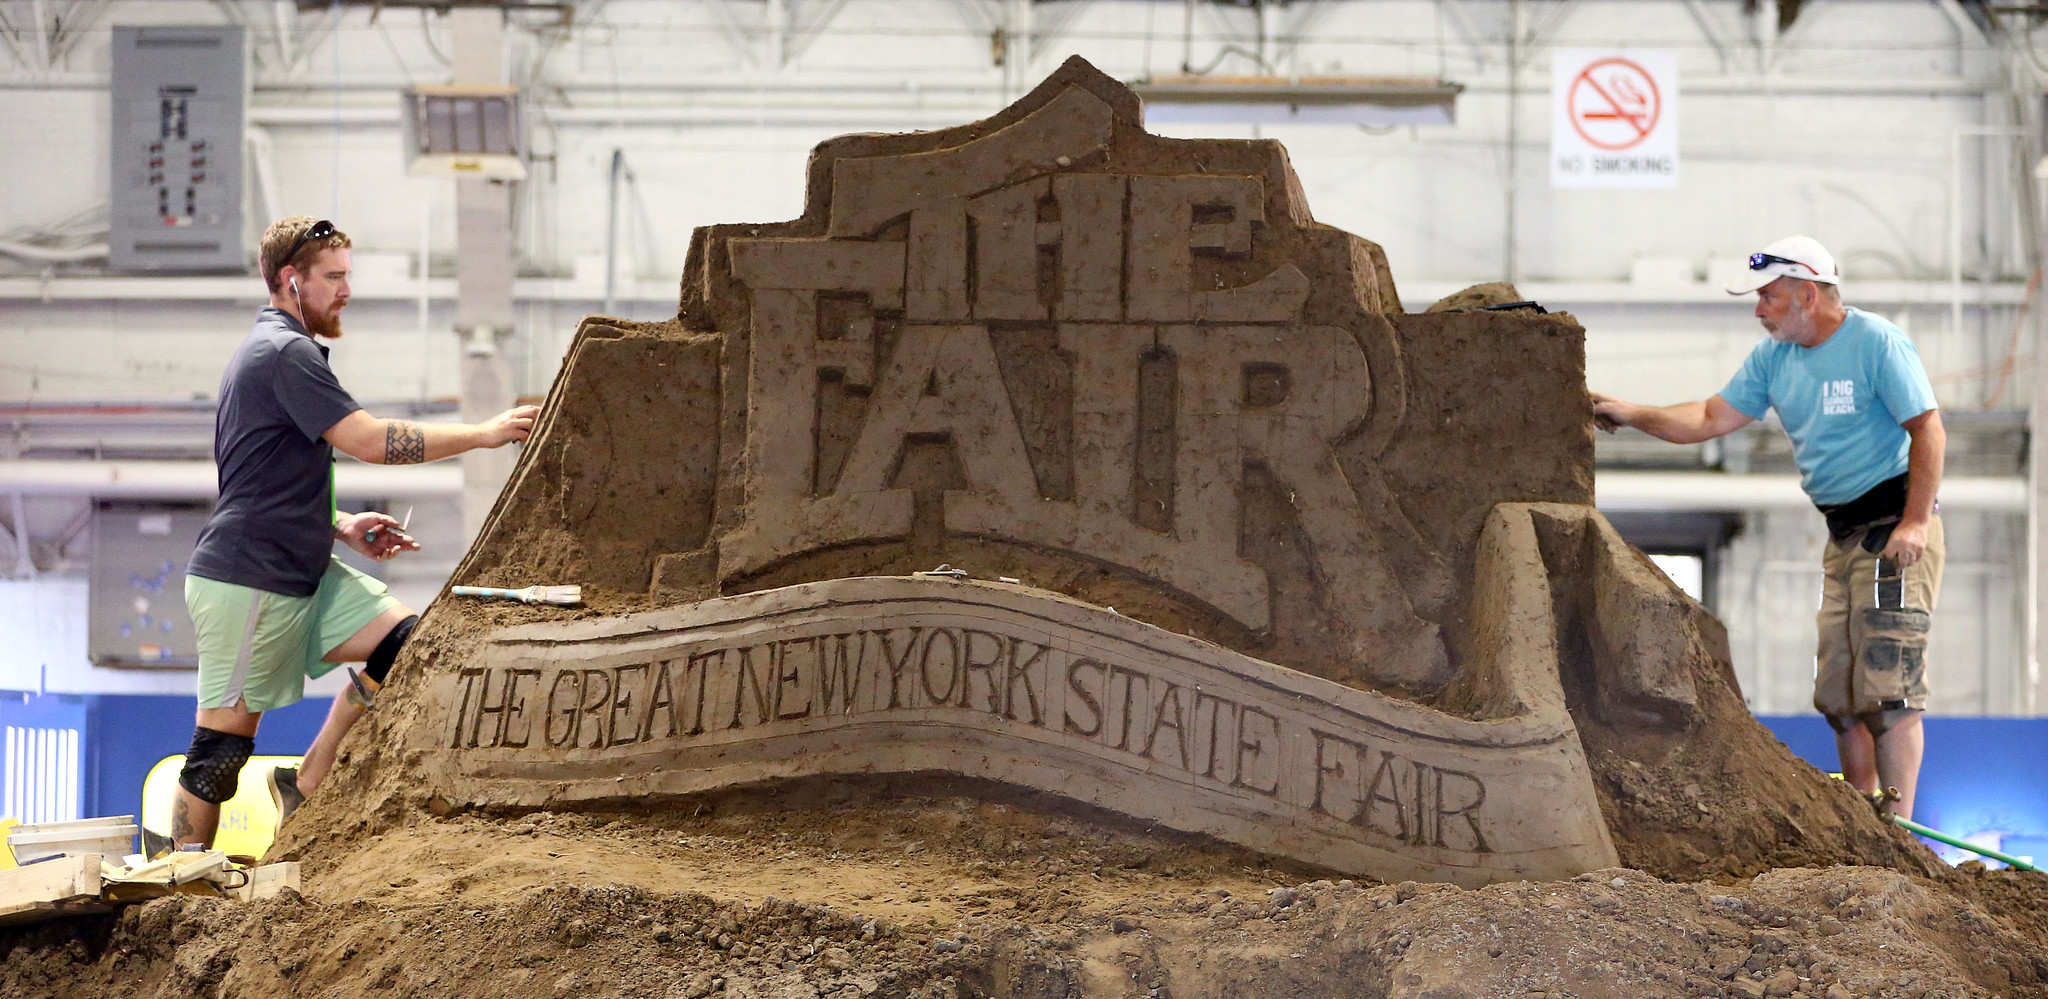 Sand sculpture of the Great New York State Fair logo with two individuals working on it. 